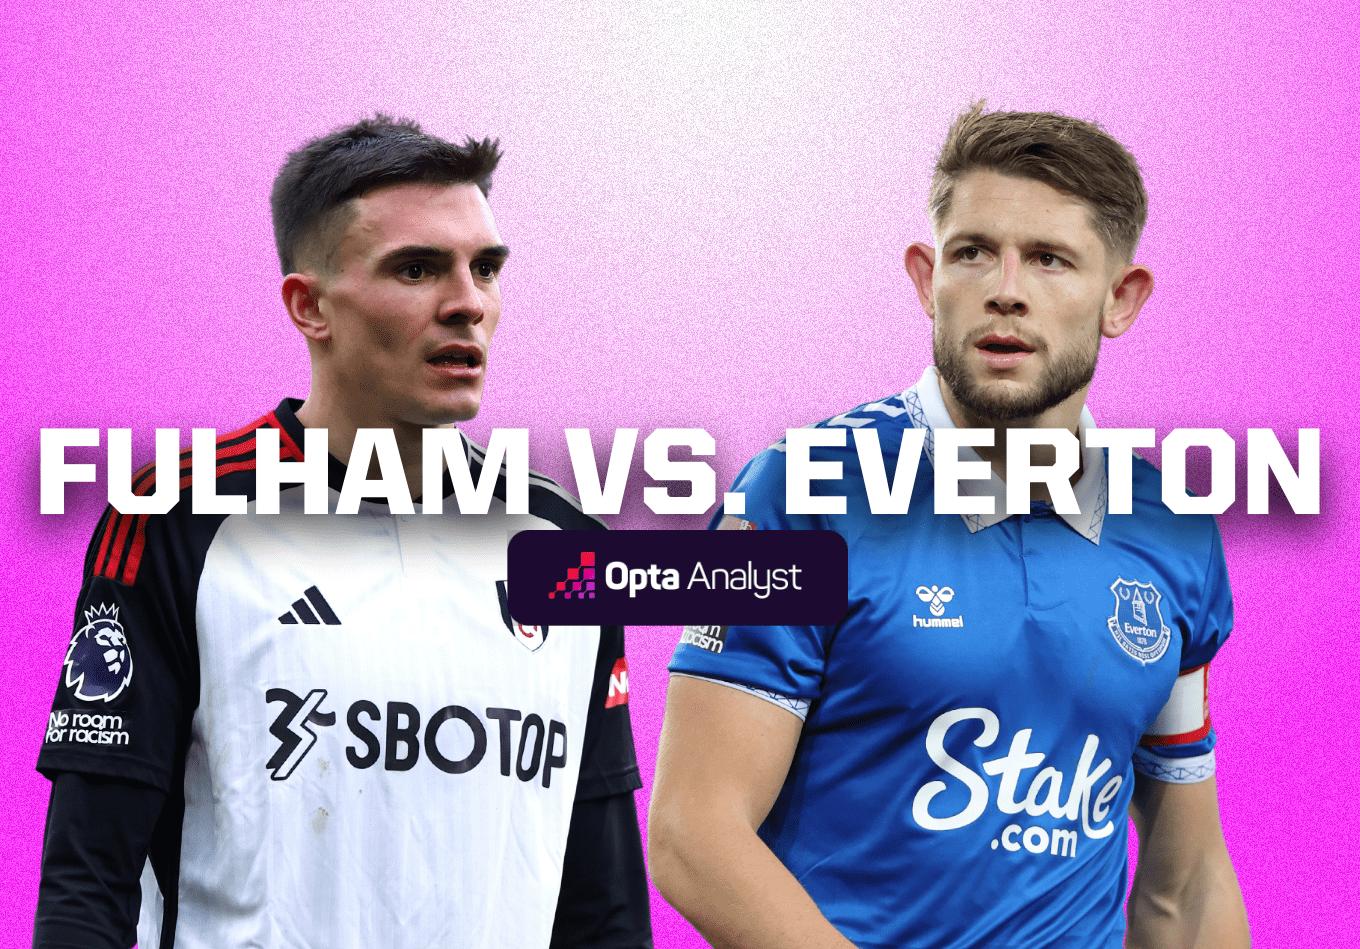 Fulham vs Everton: Prediction and Preview